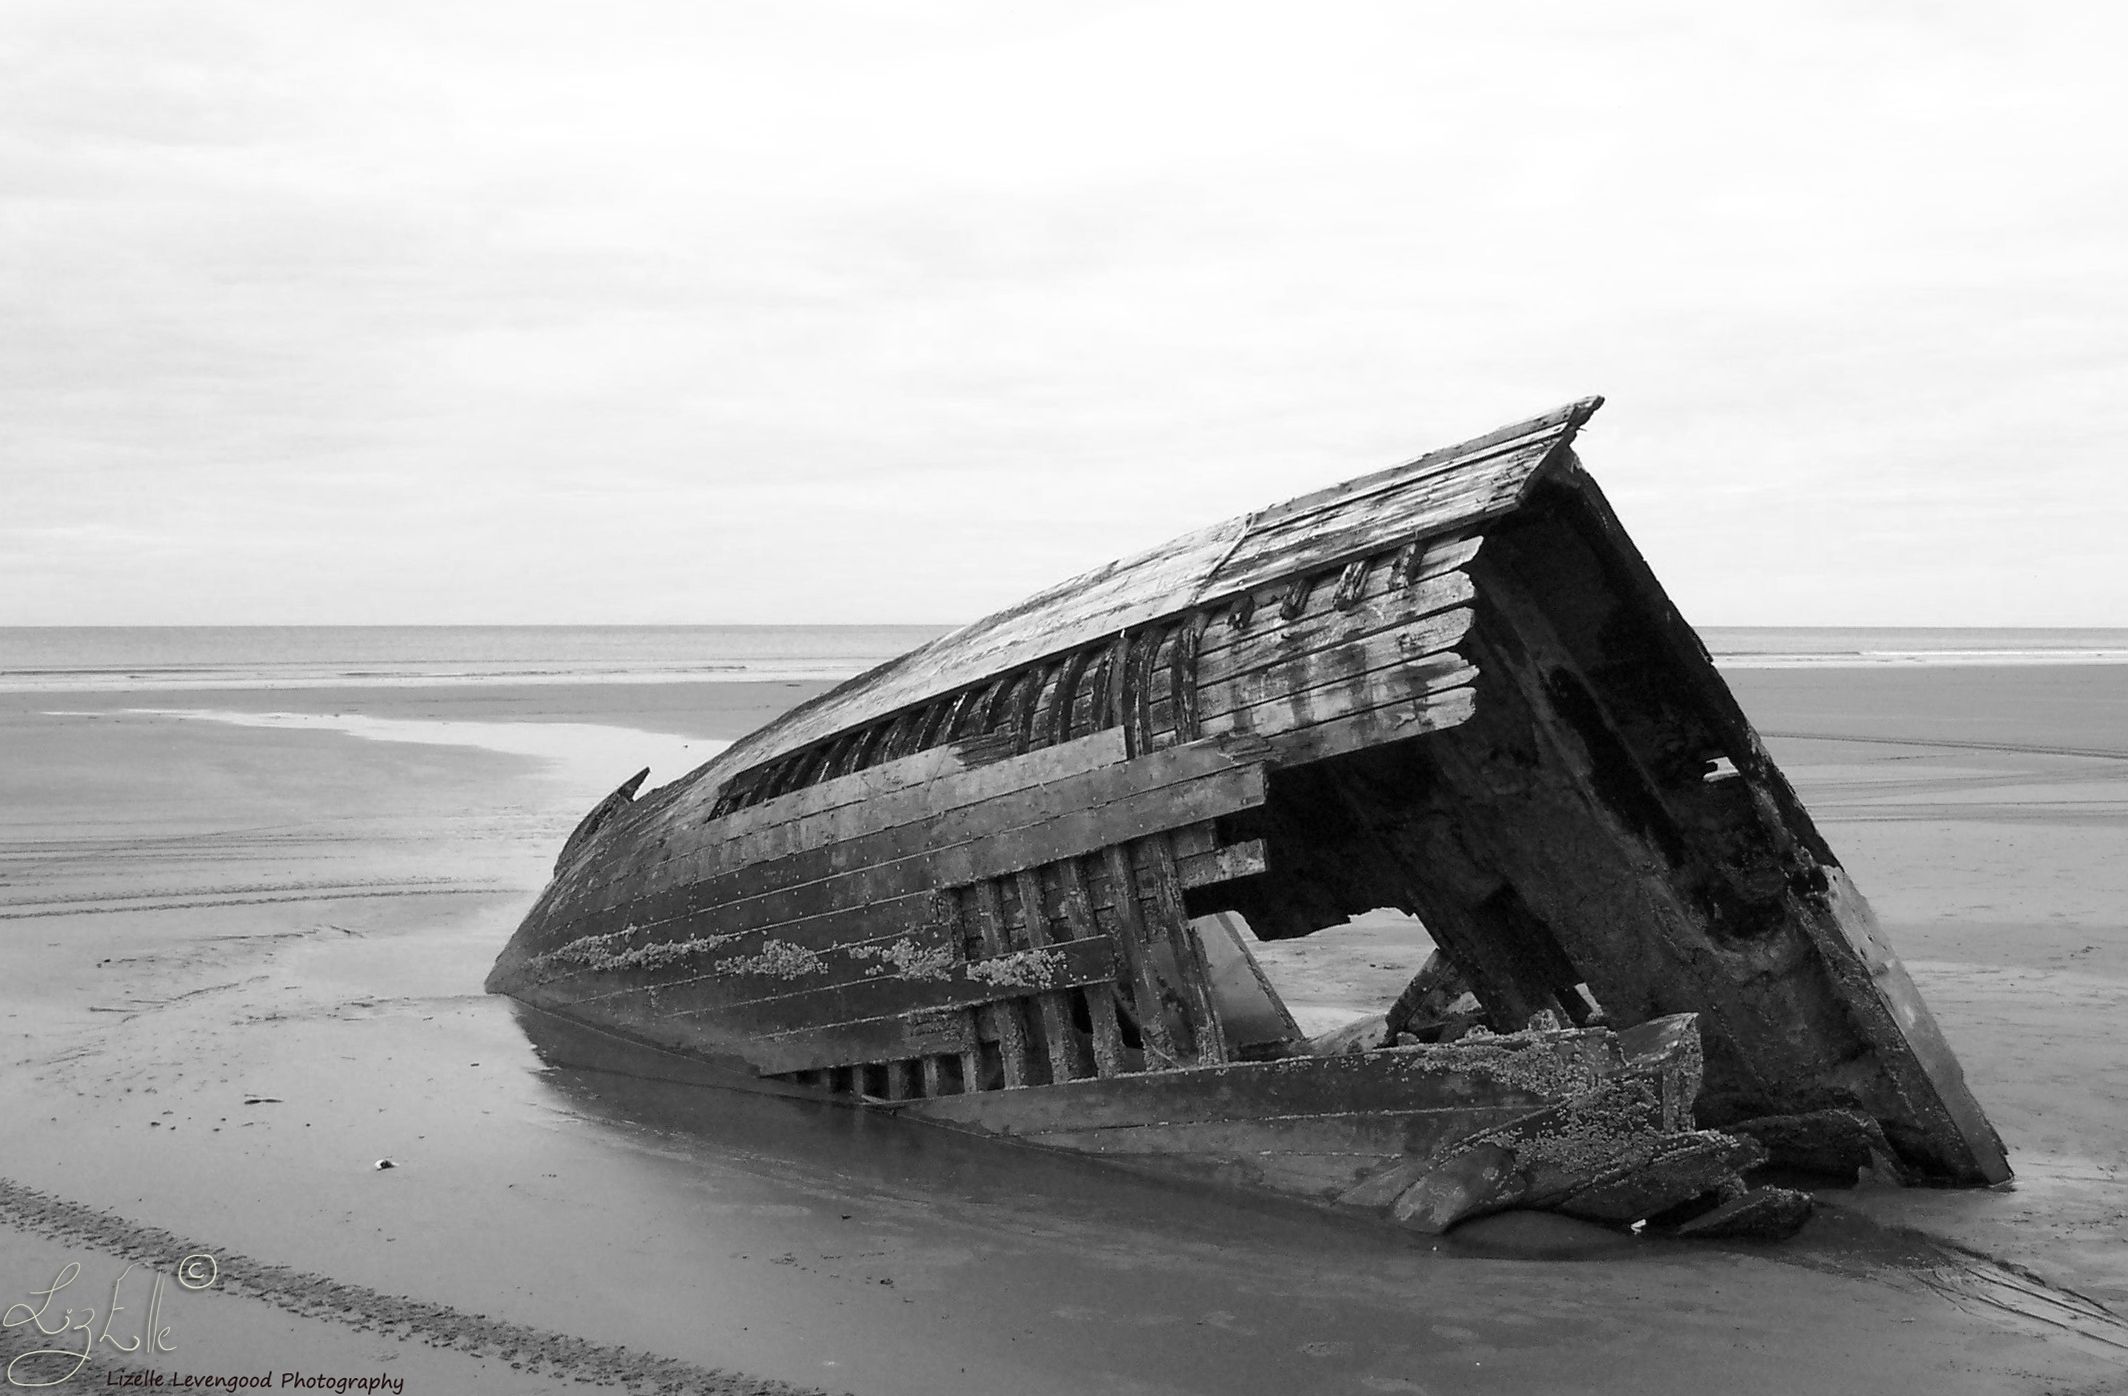 Boat on a beach for upload.jpg